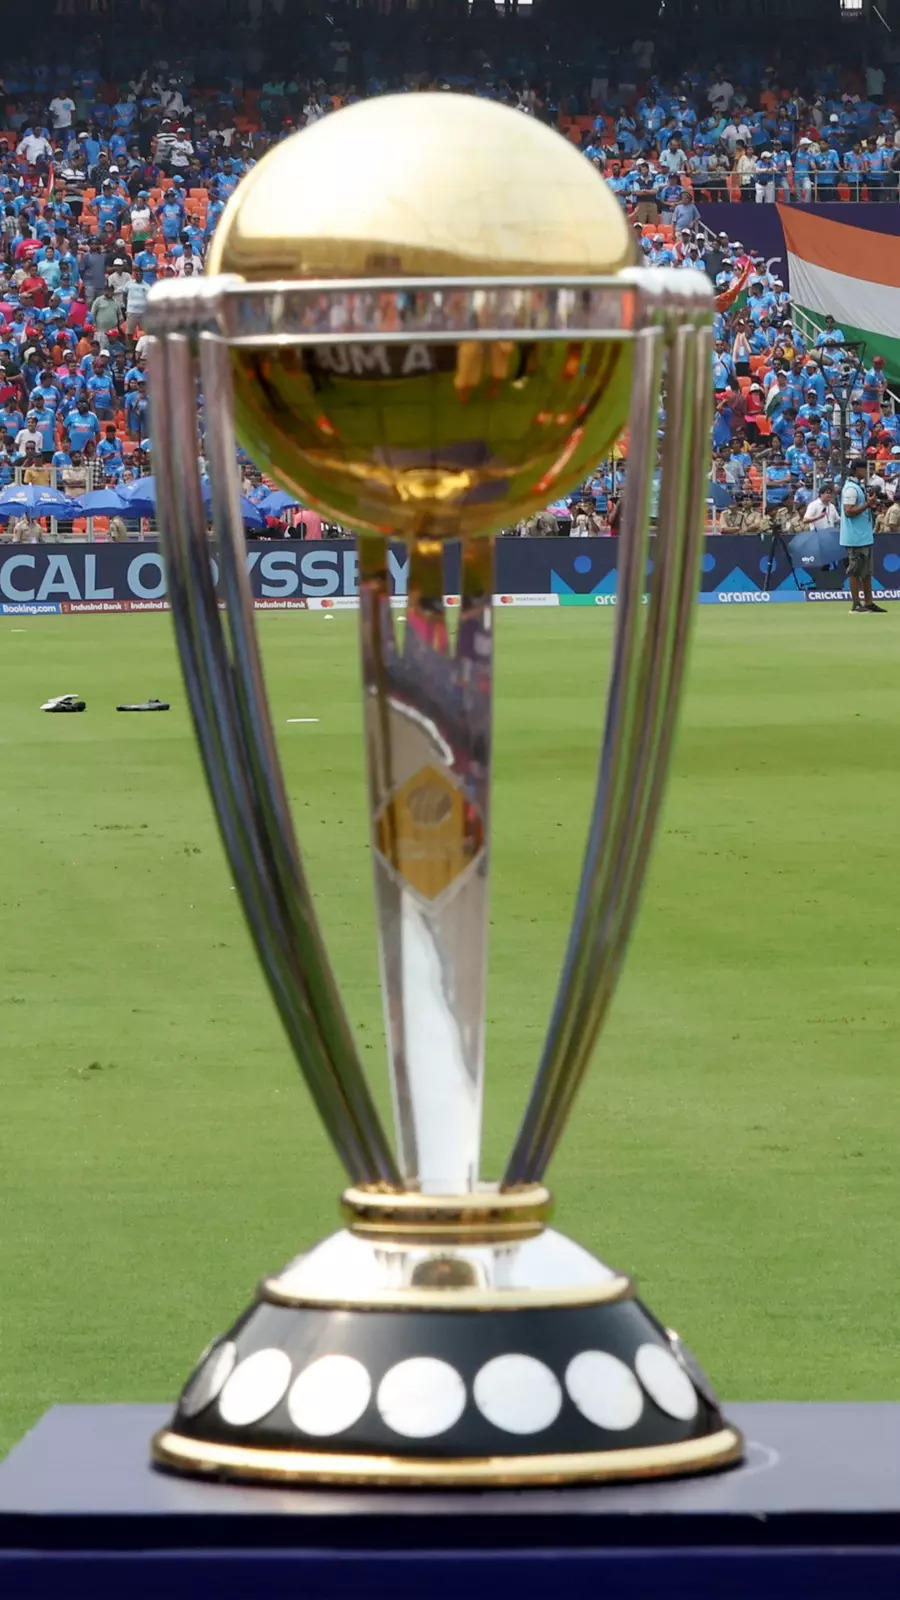 World Cup final beckons India